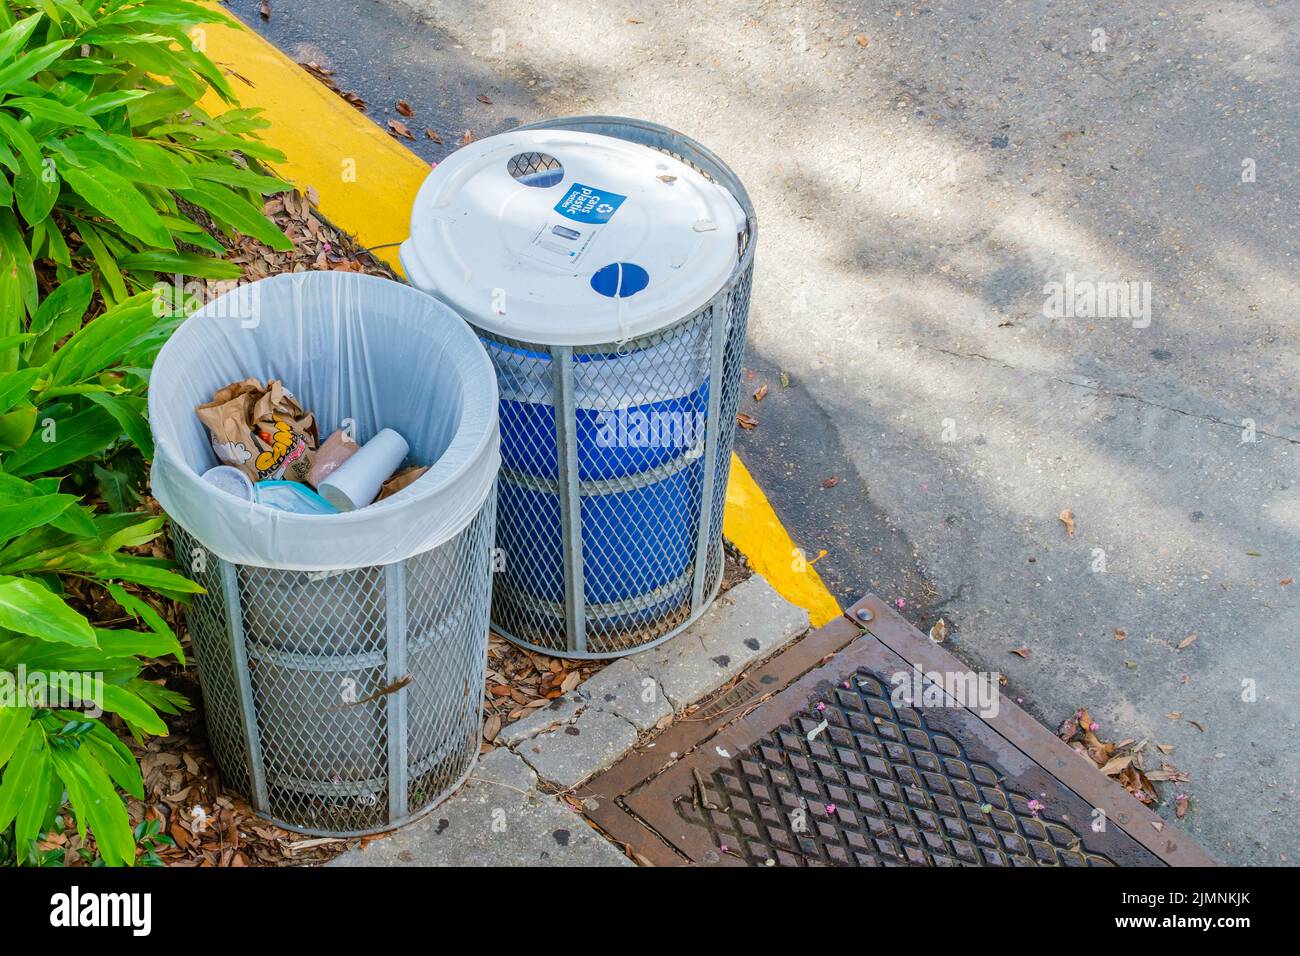 NEW ORLEANS, LA, USA - AUGUST 5, 2022: Trash can next to recycling can on Tulane University campus Stock Photo